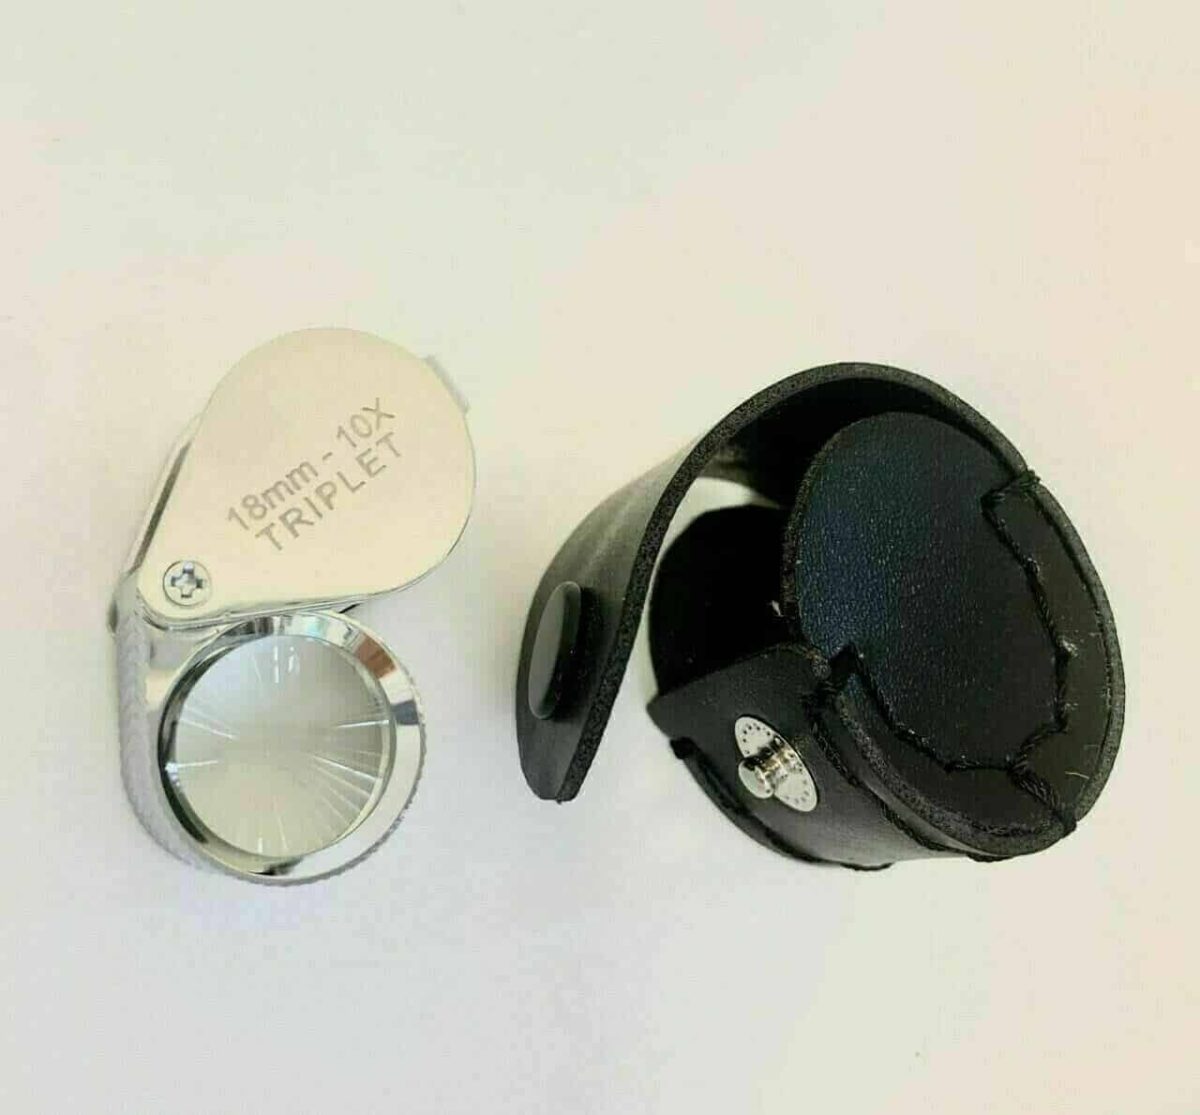 Triplet Lenses Eye Loupes Magnifier 18mm10x Contains Case Jewellery Craft Tool 193710338733